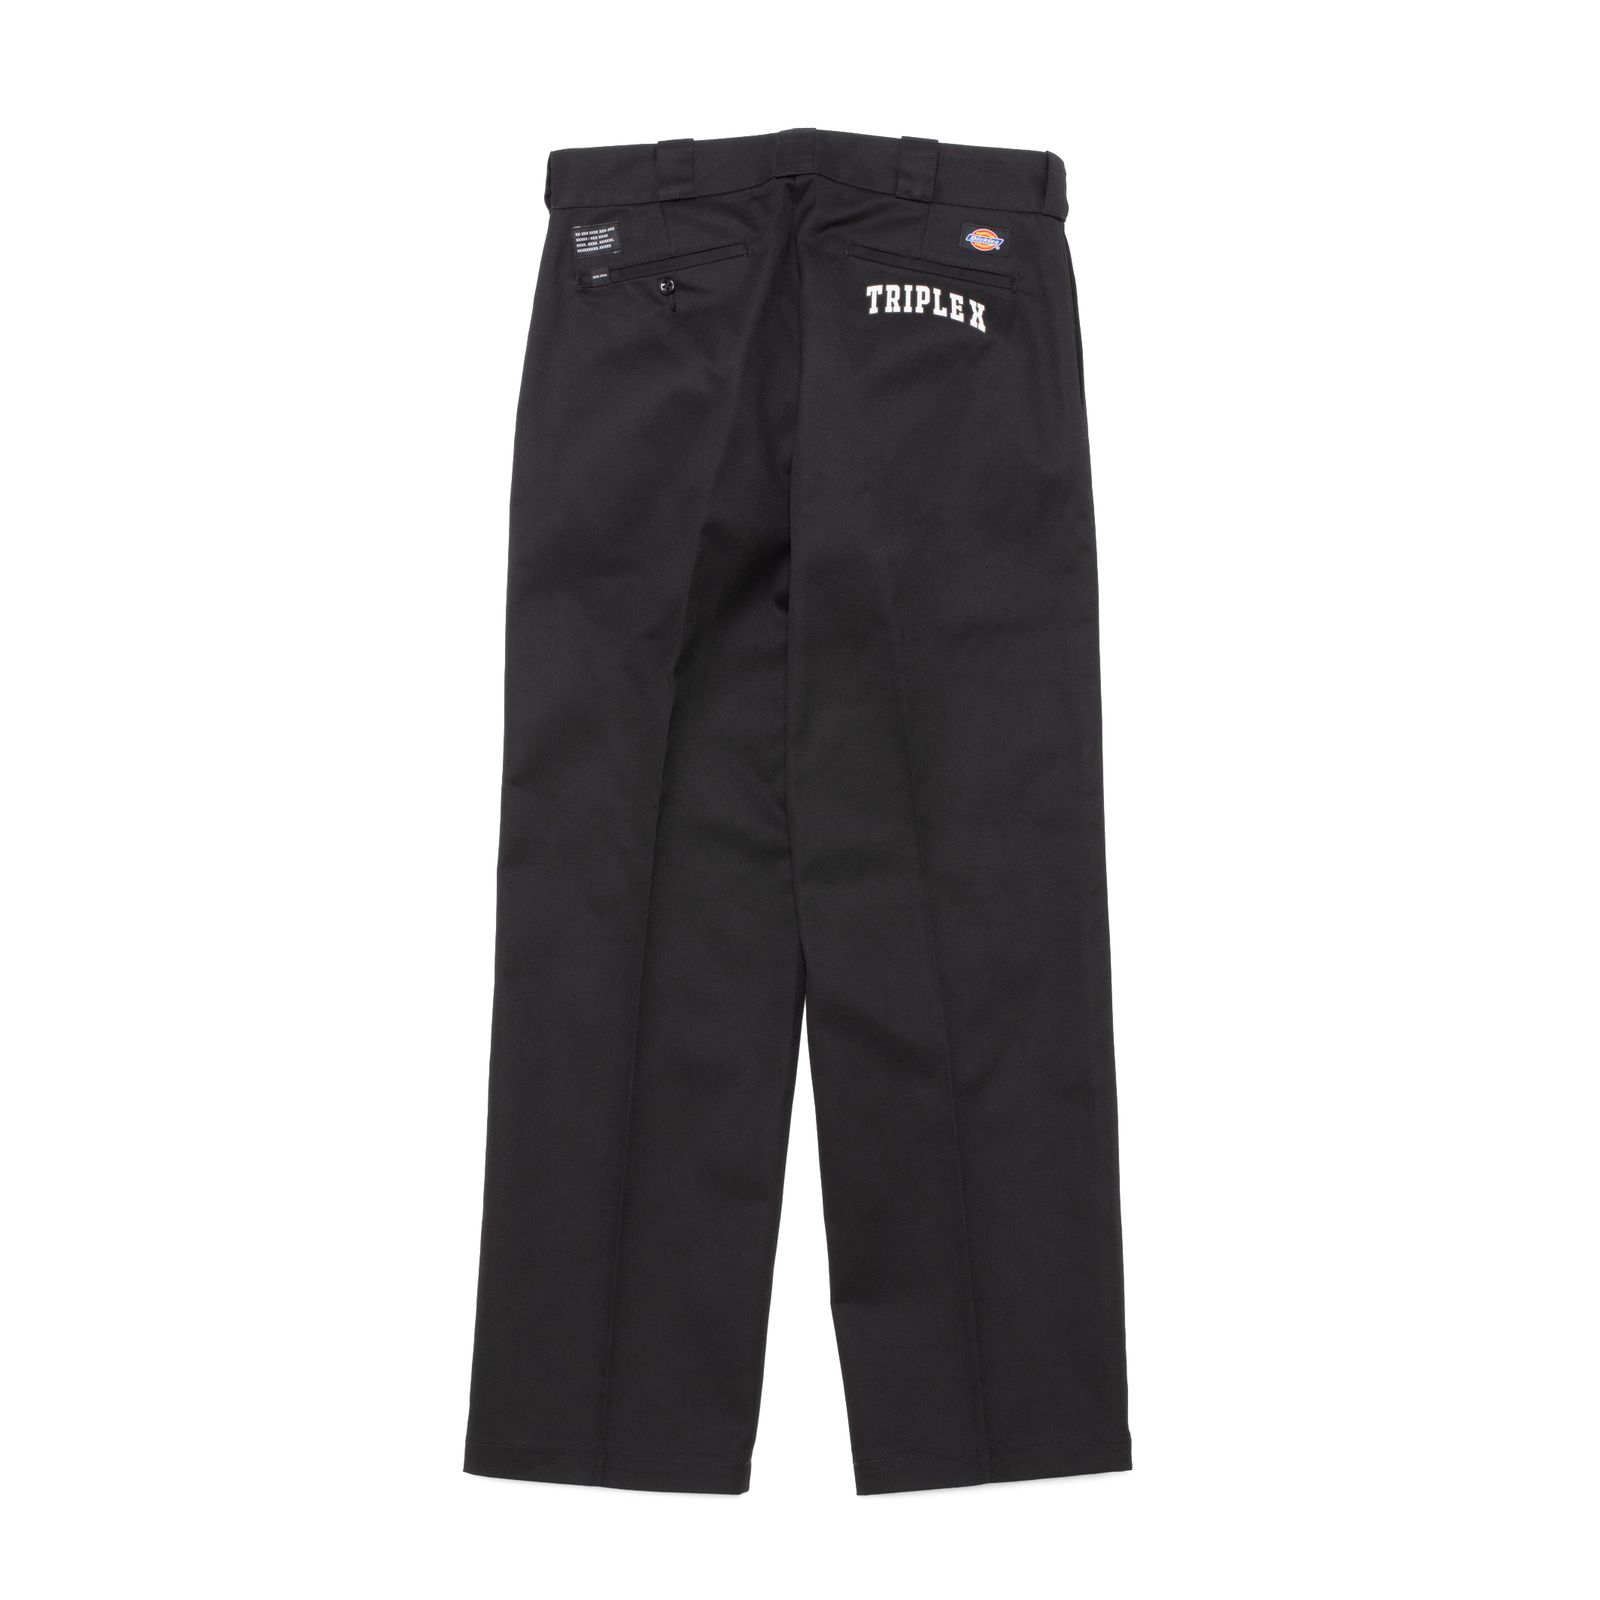 DICKIES×GOD SELECTION XXX ワークパンツ3色セット！！ - ワークパンツ